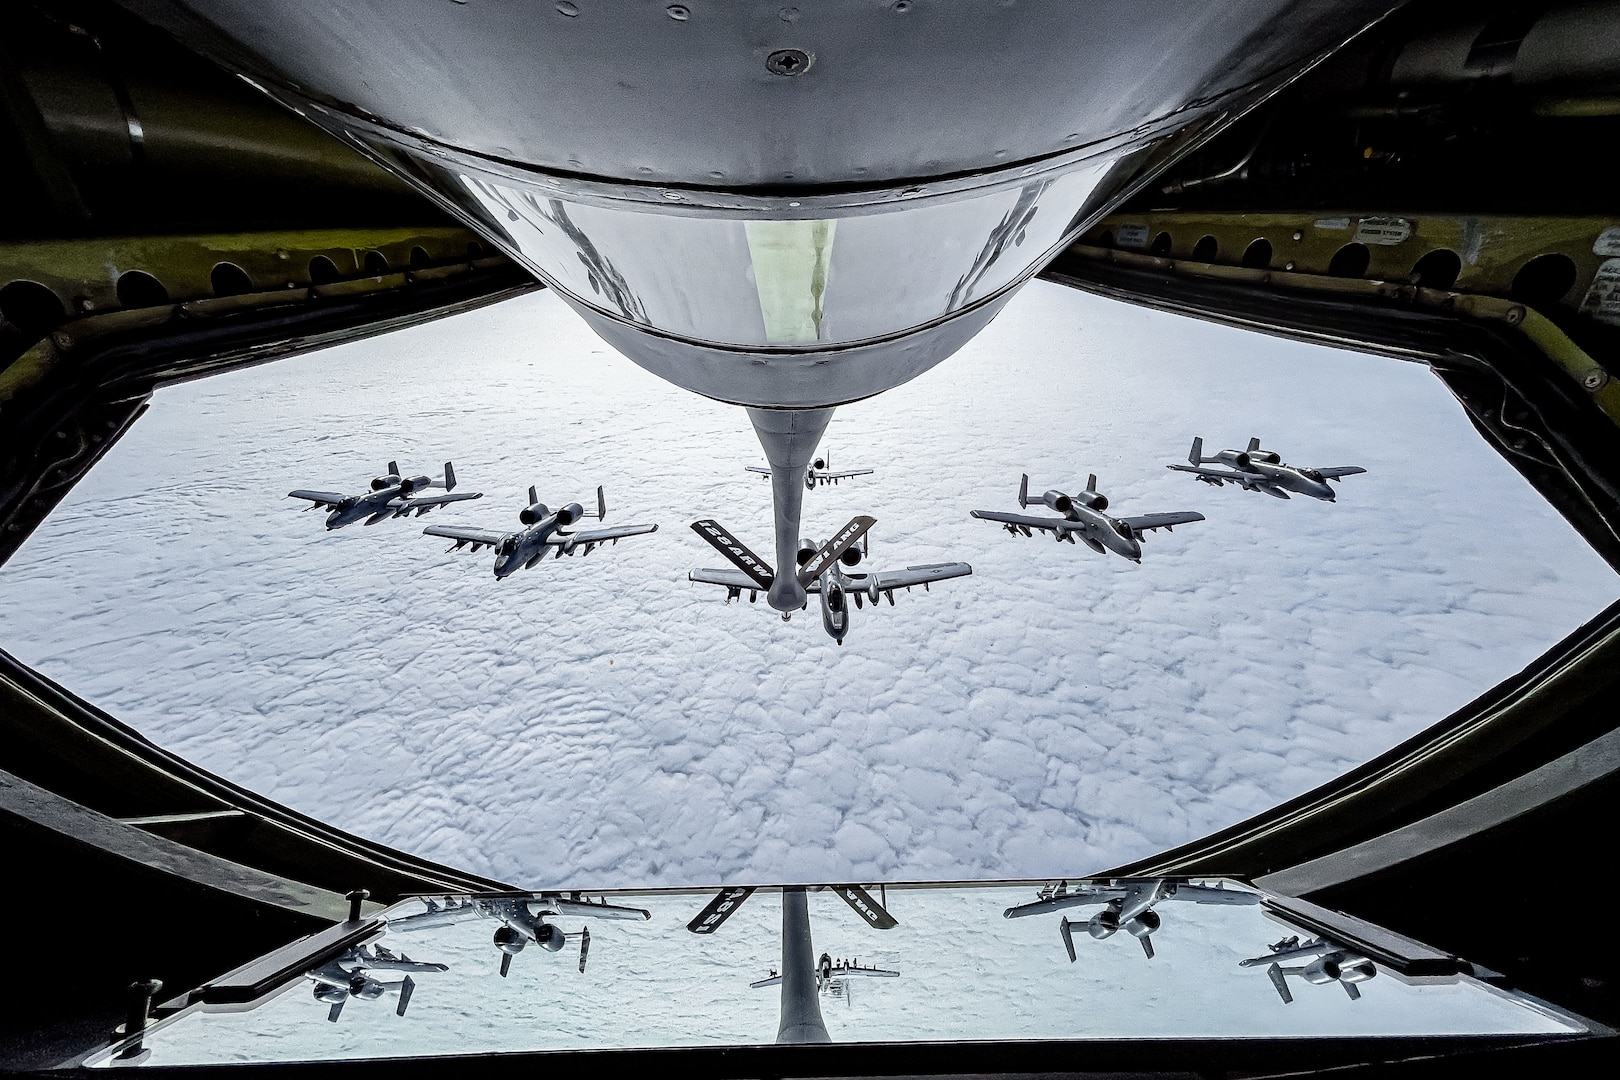 An Air Force A-10 Thunderbolt II aircraft flies in formation behind a KC-135 Stratotanker.